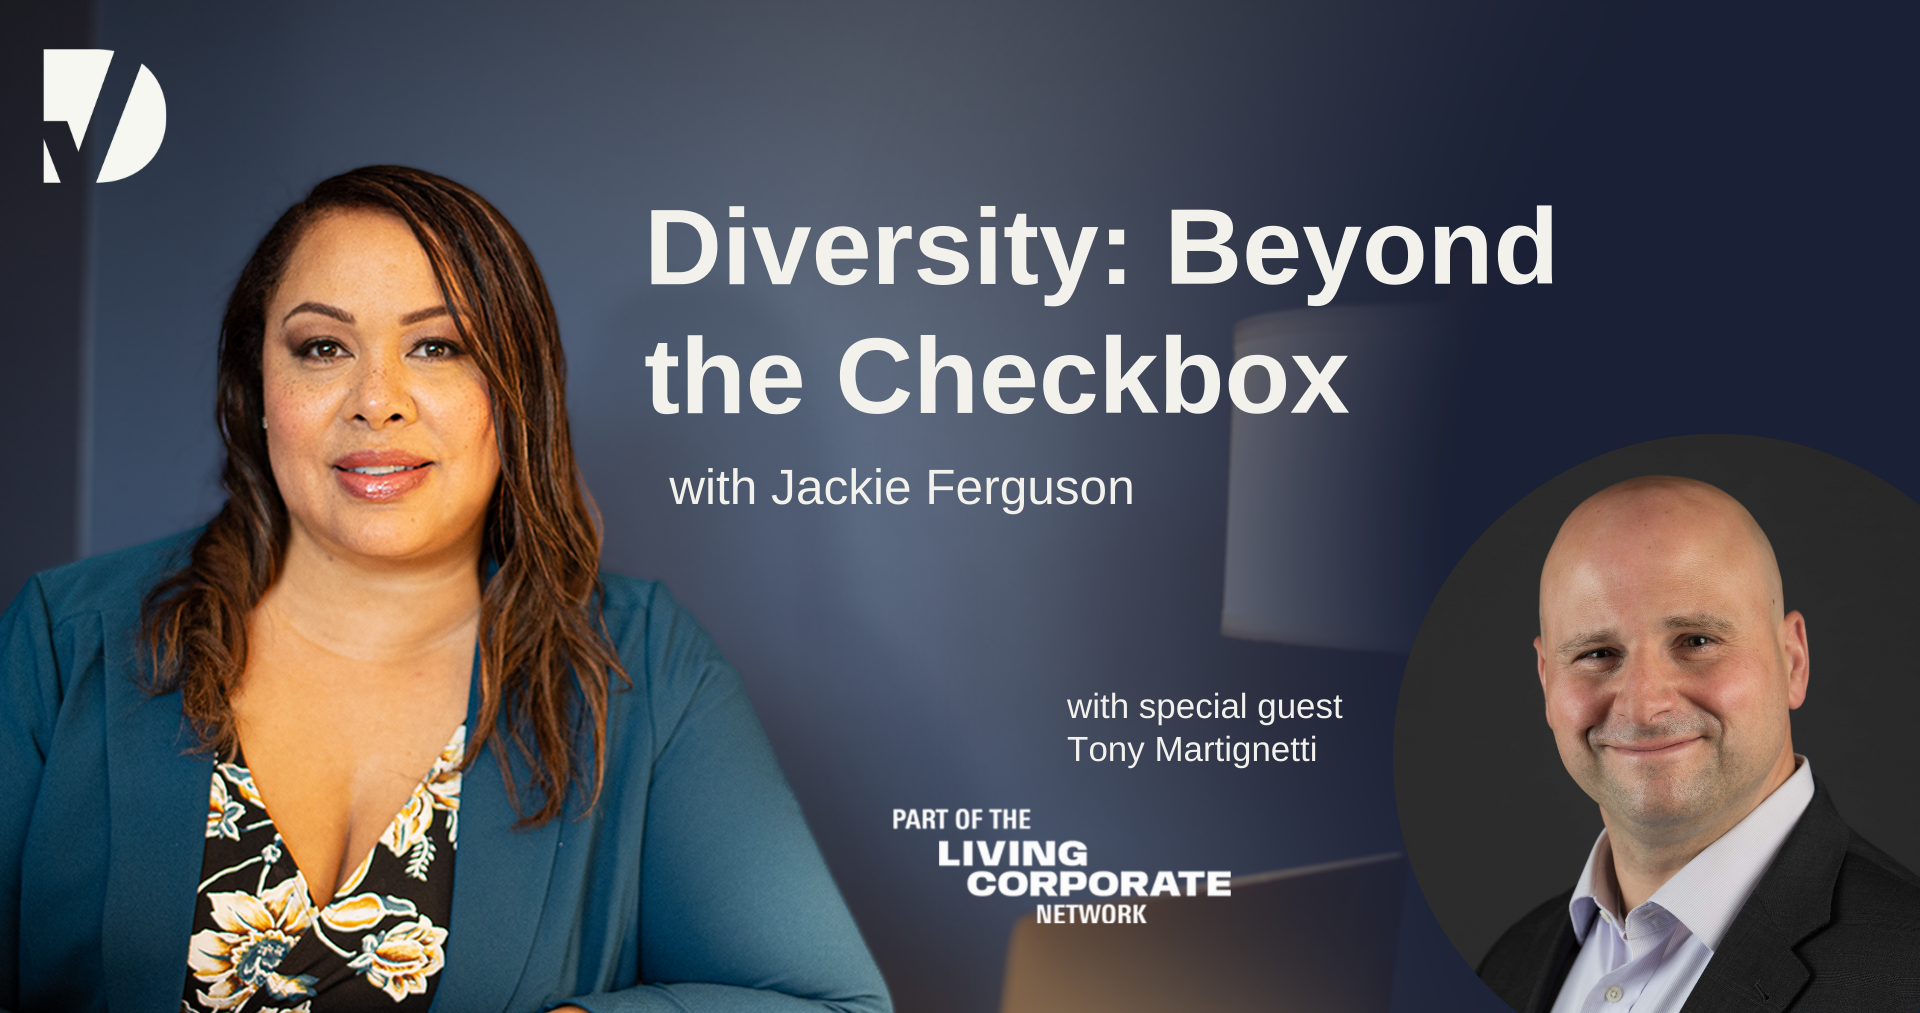 Jackie Ferguson gets ready to sit down with the next guest on 'Diversity: Beyond the Checkbox' Tony Martignetti